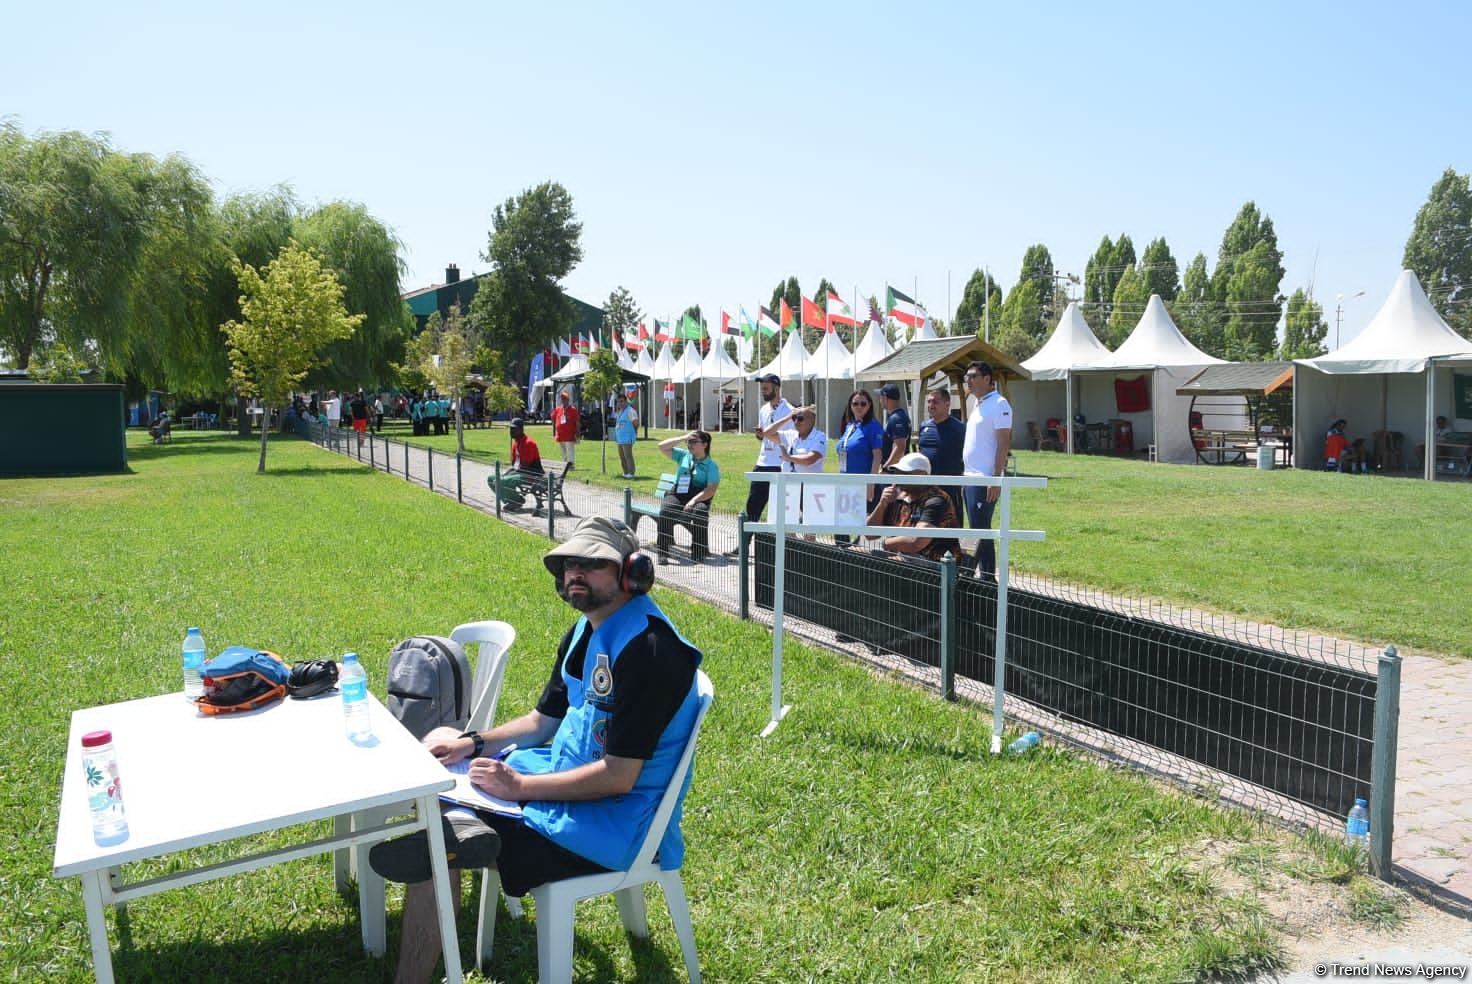 Azerbaijani skeet shooting team passes first stage of qualification at V Islamic Solidarity Games (PHOTO)